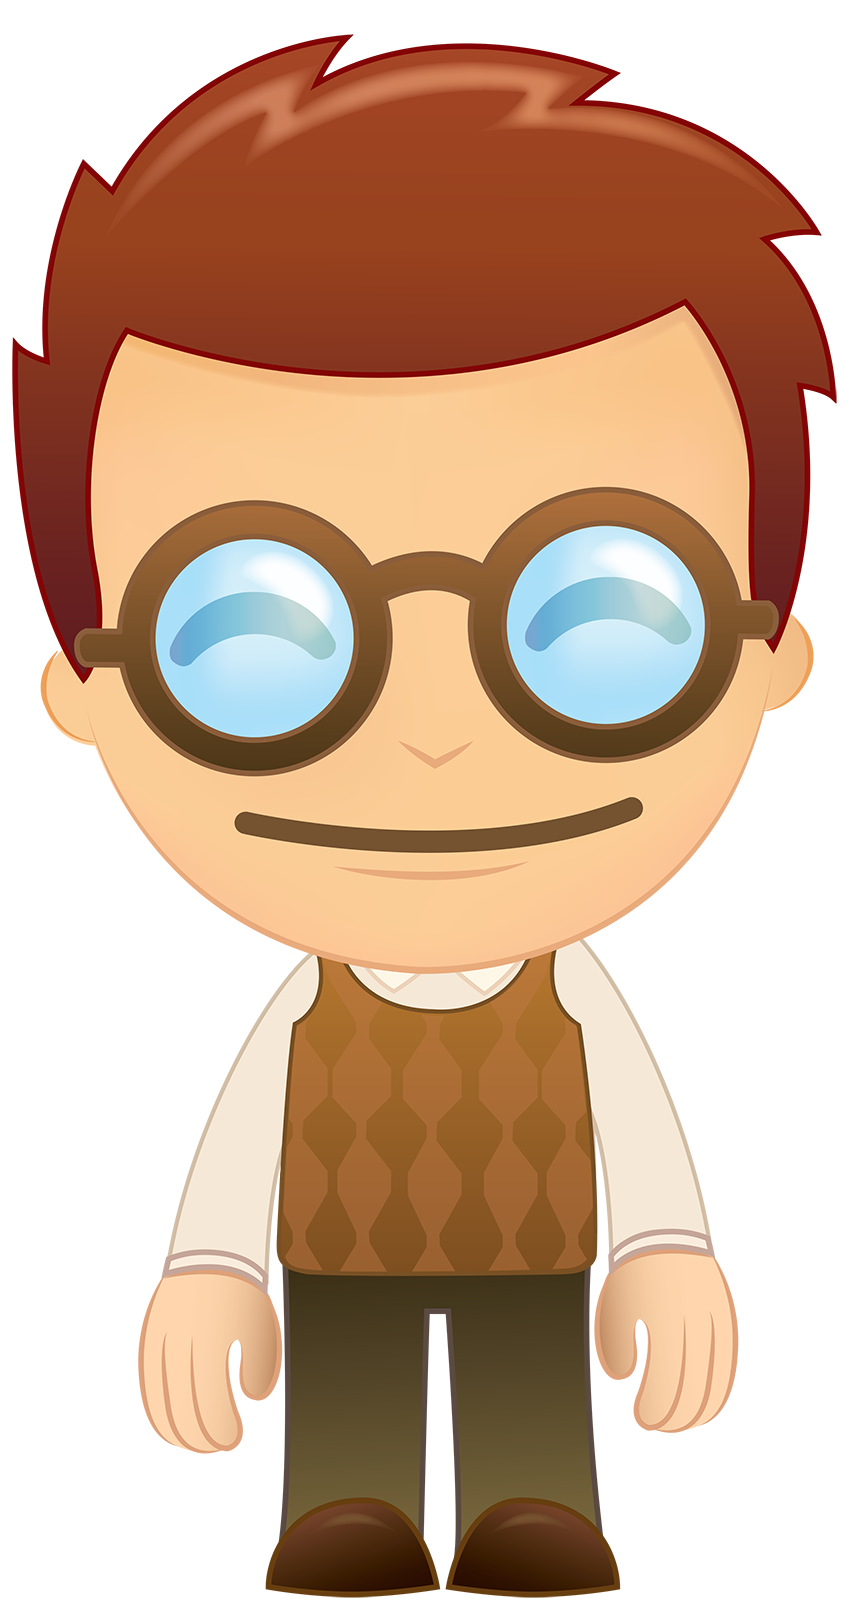 Cartoon boy by NAVDBEST on Clipart library